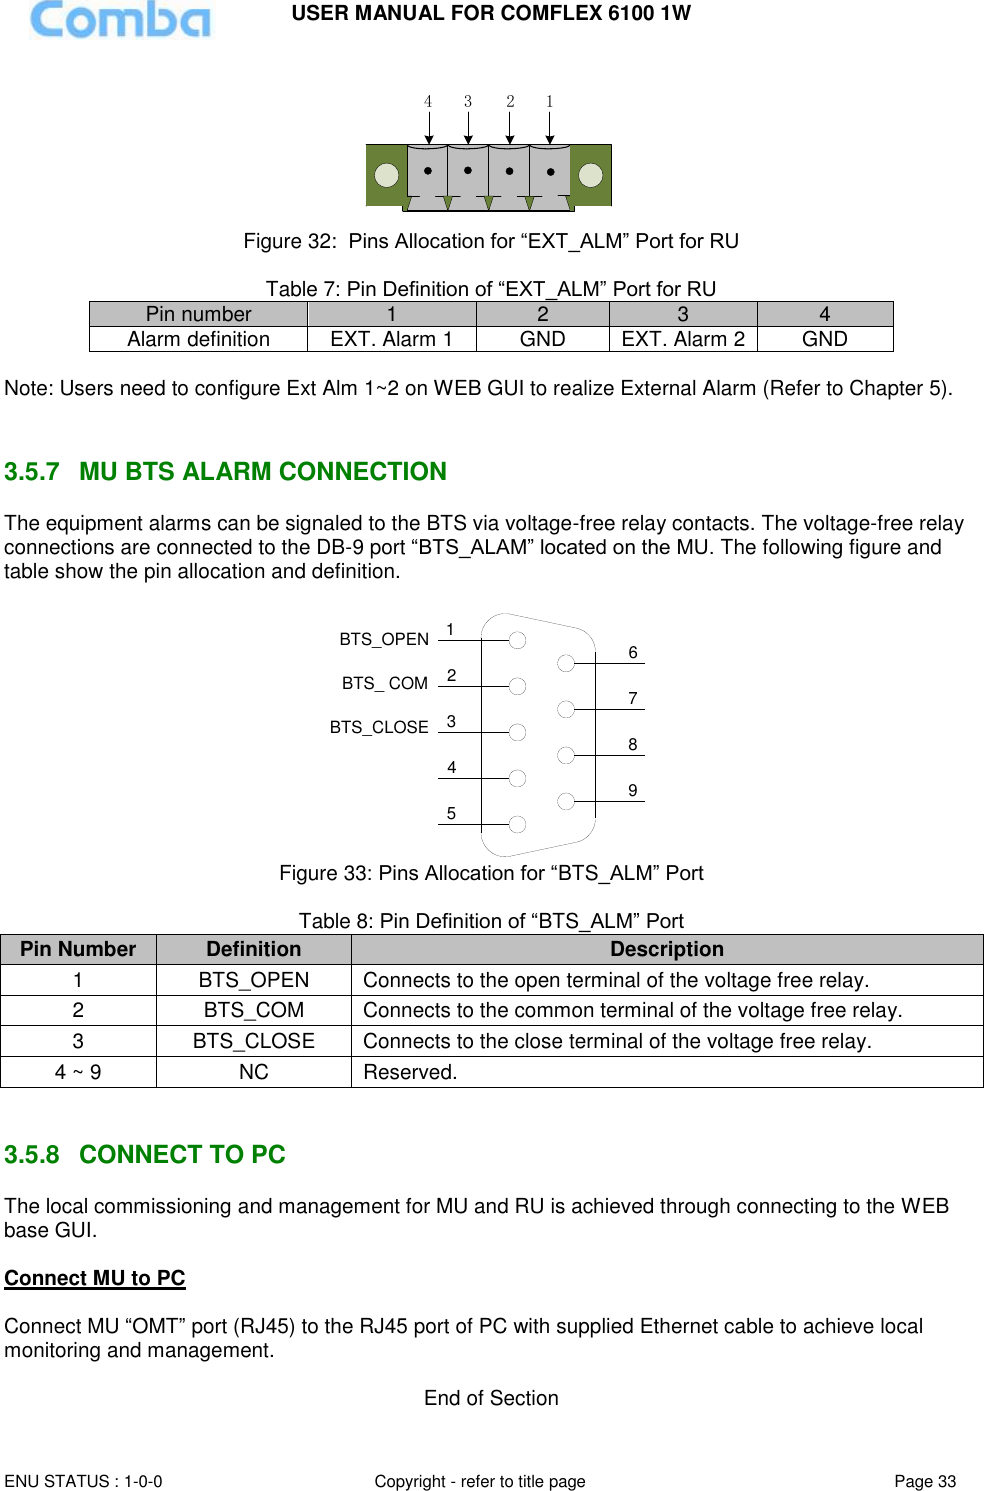 USER MANUAL FOR COMFLEX 6100 1W  ENU STATUS : 1-0-0 Copyright - refer to title page Page 33     1234 Figure 32:  Pins Allocation for “EXT_ALM” Port for RU  Table 7: Pin Definition of “EXT_ALM” Port for RU Pin number 1 2 3 4 Alarm definition EXT. Alarm 1 GND EXT. Alarm 2 GND  Note: Users need to configure Ext Alm 1~2 on WEB GUI to realize External Alarm (Refer to Chapter 5).    3.5.7  MU BTS ALARM CONNECTION The equipment alarms can be signaled to the BTS via voltage-free relay contacts. The voltage-free relay connections are connected to the DB-9 port “BTS_ALAM” located on the MU. The following figure and table show the pin allocation and definition.    124356798BTS_OPENBTS_CLOSEBTS_ COM Figure 33: Pins Allocation for “BTS_ALM” Port  Table 8: Pin Definition of “BTS_ALM” Port Pin Number Definition Description 1 BTS_OPEN Connects to the open terminal of the voltage free relay. 2 BTS_COM  Connects to the common terminal of the voltage free relay. 3 BTS_CLOSE Connects to the close terminal of the voltage free relay. 4 ~ 9 NC Reserved.   3.5.8  CONNECT TO PC The local commissioning and management for MU and RU is achieved through connecting to the WEB base GUI.  Connect MU to PC  Connect MU “OMT” port (RJ45) to the RJ45 port of PC with supplied Ethernet cable to achieve local monitoring and management.   End of Section 